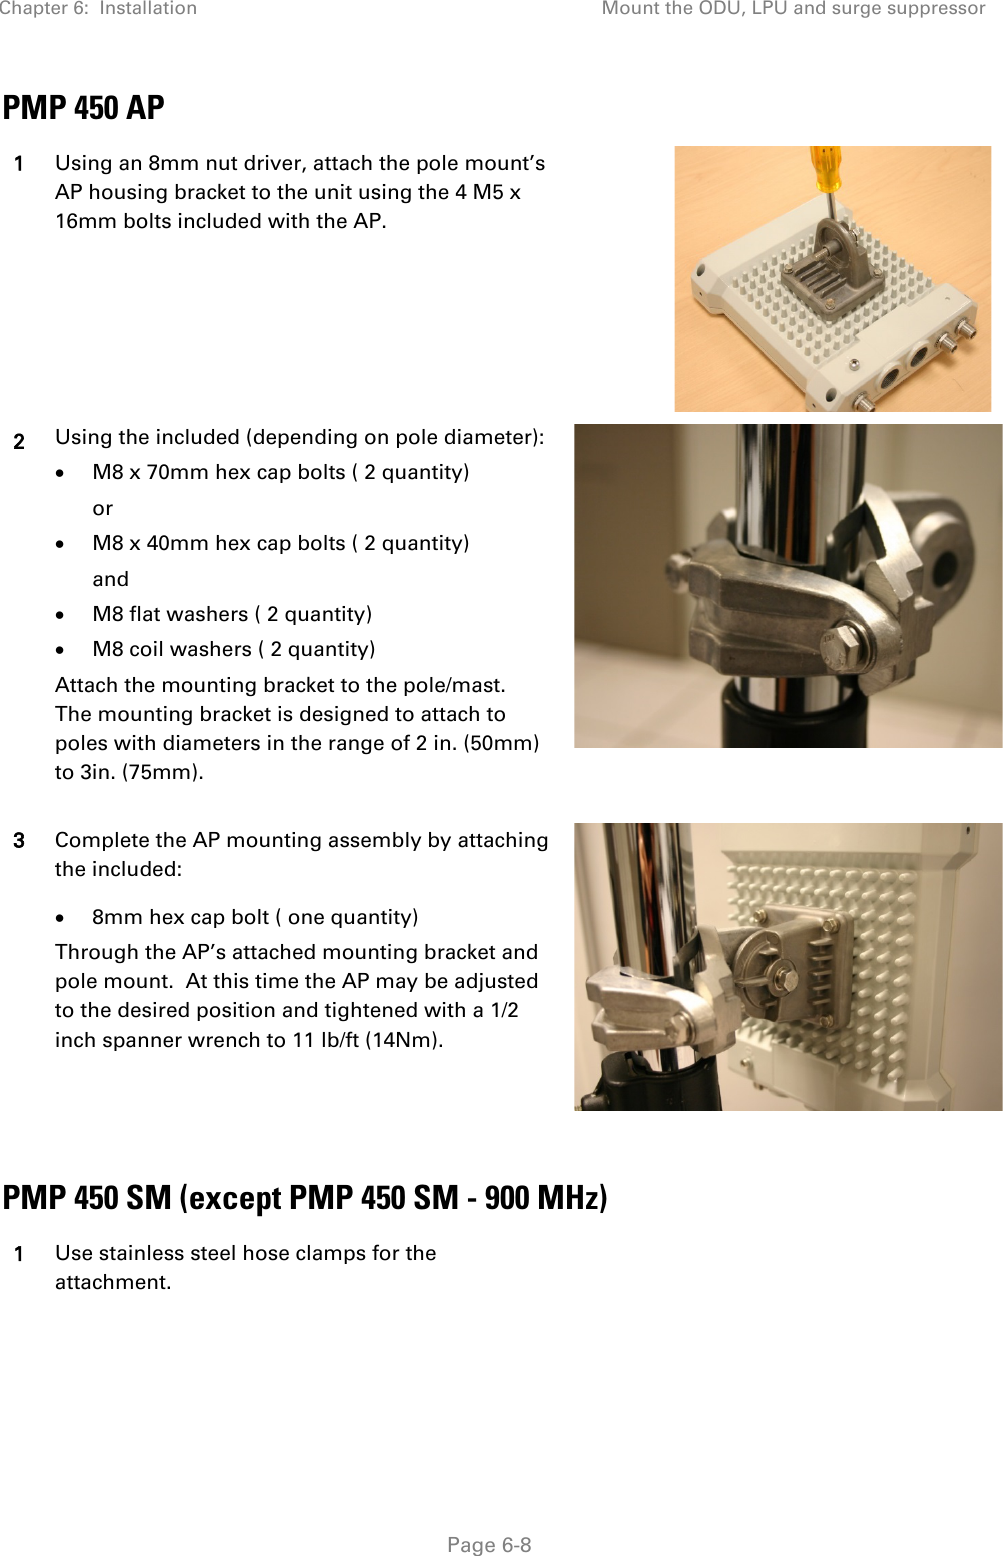 Chapter 6:  Installation Mount the ODU, LPU and surge suppressor   Page 6-8 PMP 450 AP 1 Using an 8mm nut driver, attach the pole mount’s AP housing bracket to the unit using the 4 M5 x 16mm bolts included with the AP.  2 Using the included (depending on pole diameter): • M8 x 70mm hex cap bolts ( 2 quantity) or • M8 x 40mm hex cap bolts ( 2 quantity) and • M8 flat washers ( 2 quantity) • M8 coil washers ( 2 quantity) Attach the mounting bracket to the pole/mast.  The mounting bracket is designed to attach to poles with diameters in the range of 2 in. (50mm) to 3in. (75mm).  3 Complete the AP mounting assembly by attaching the included: • 8mm hex cap bolt ( one quantity) Through the AP’s attached mounting bracket and pole mount.  At this time the AP may be adjusted to the desired position and tightened with a 1/2 inch spanner wrench to 11 lb/ft (14Nm).    PMP 450 SM (except PMP 450 SM - 900 MHz) 1 Use stainless steel hose clamps for the attachment. 